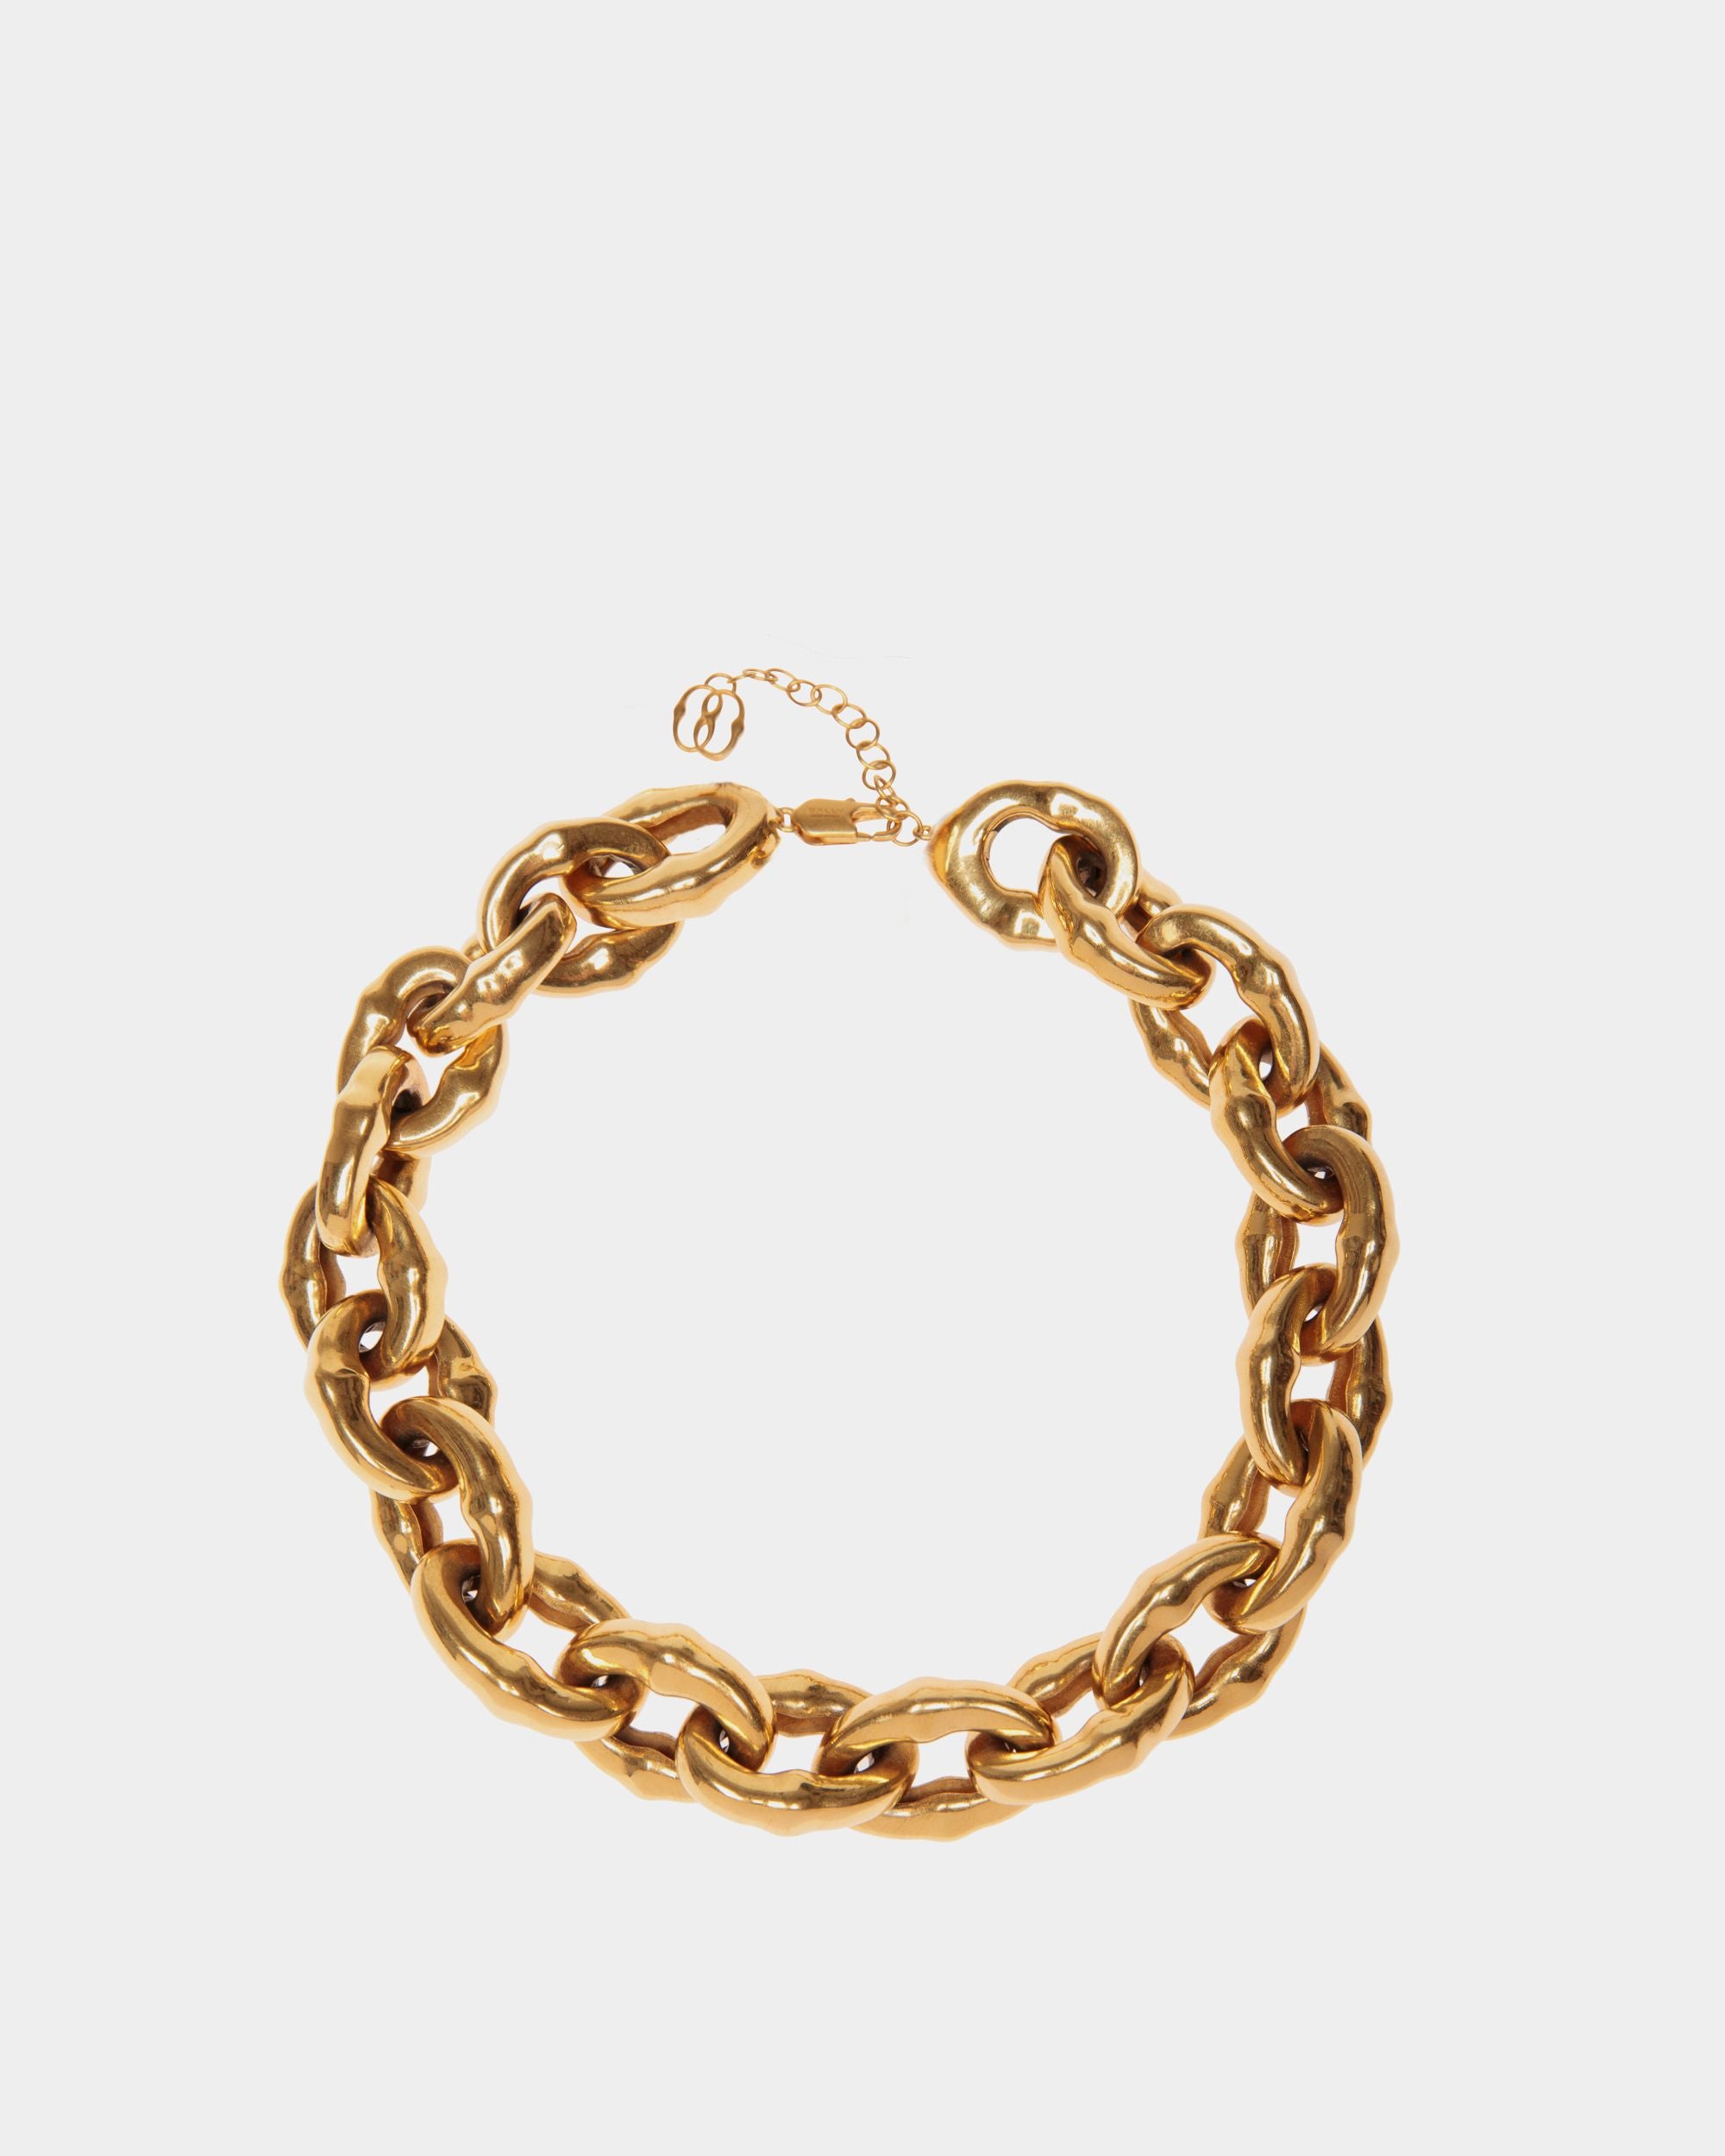 Chain Choker | Women's Necklace | Hammered Gold | Bally | Still Life Front